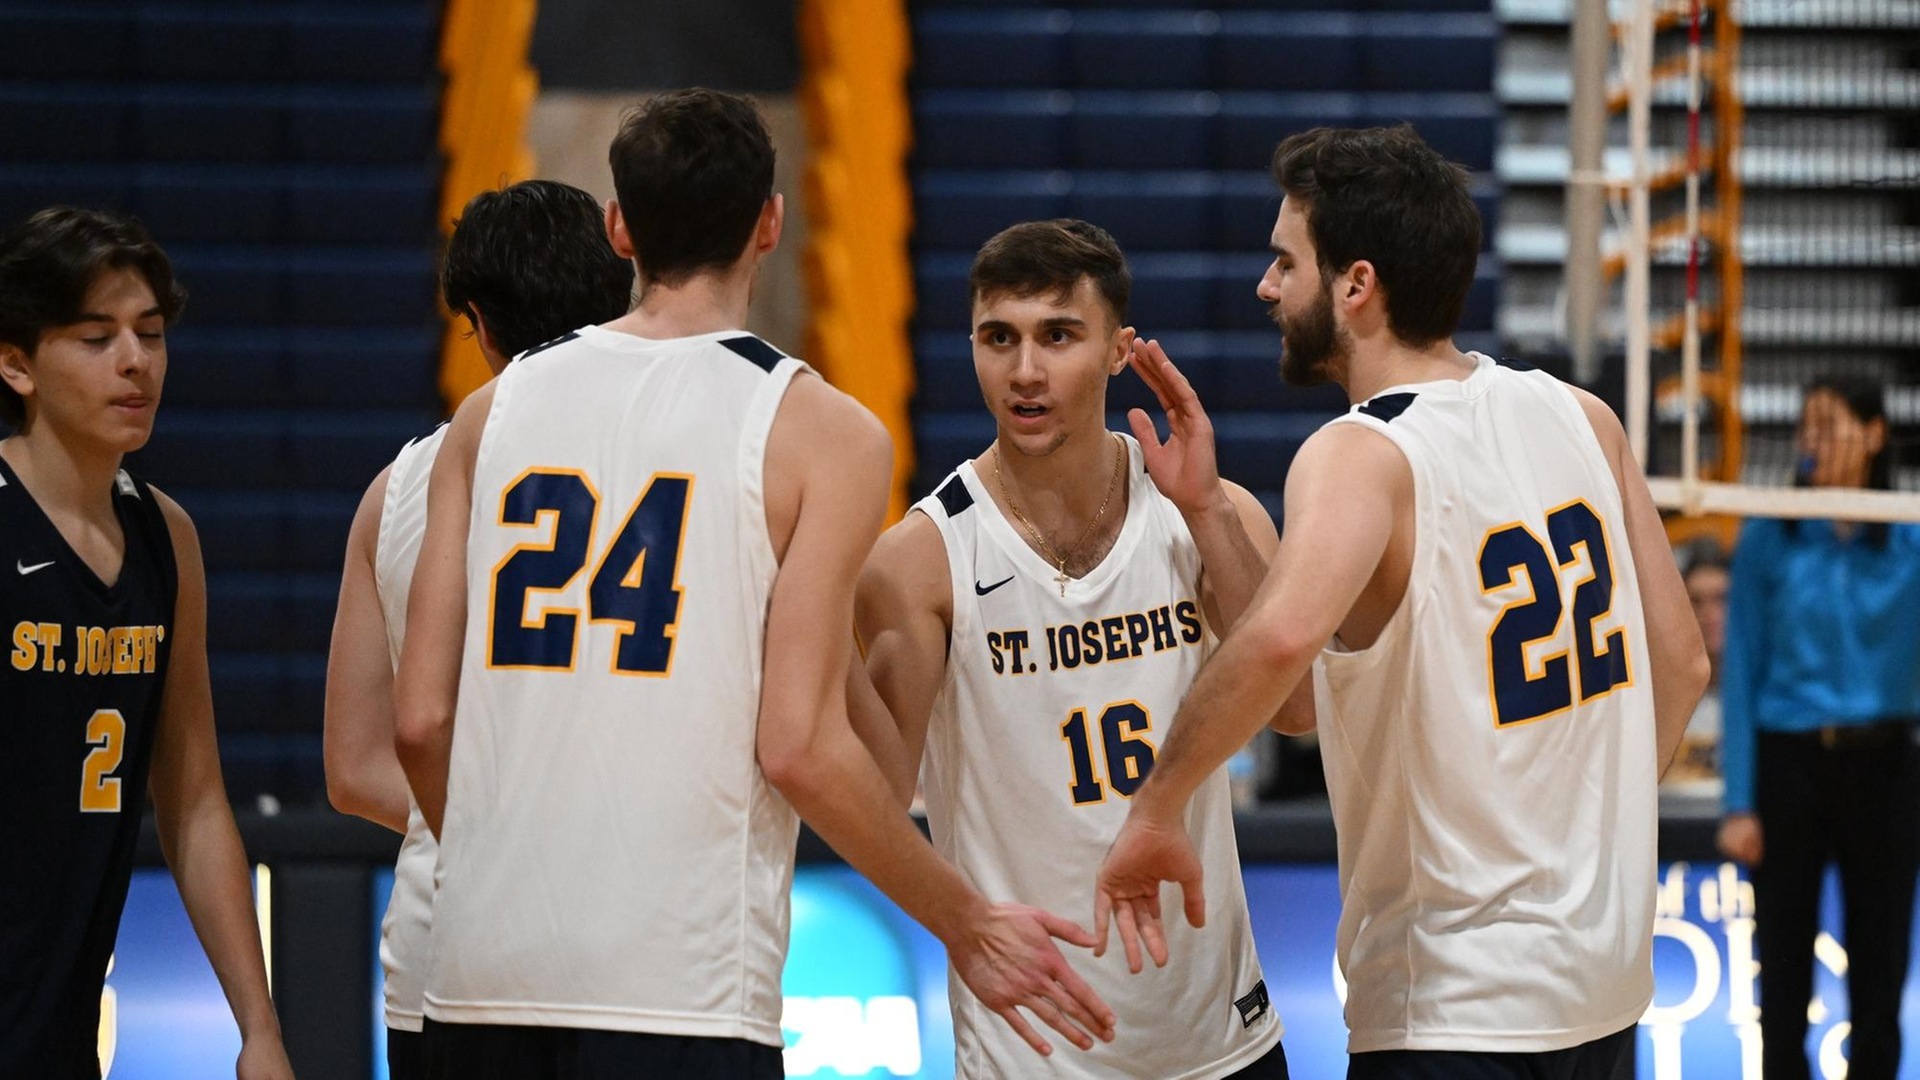 Men's Volleyball Stopped by No. 2 Springfield, 3-1